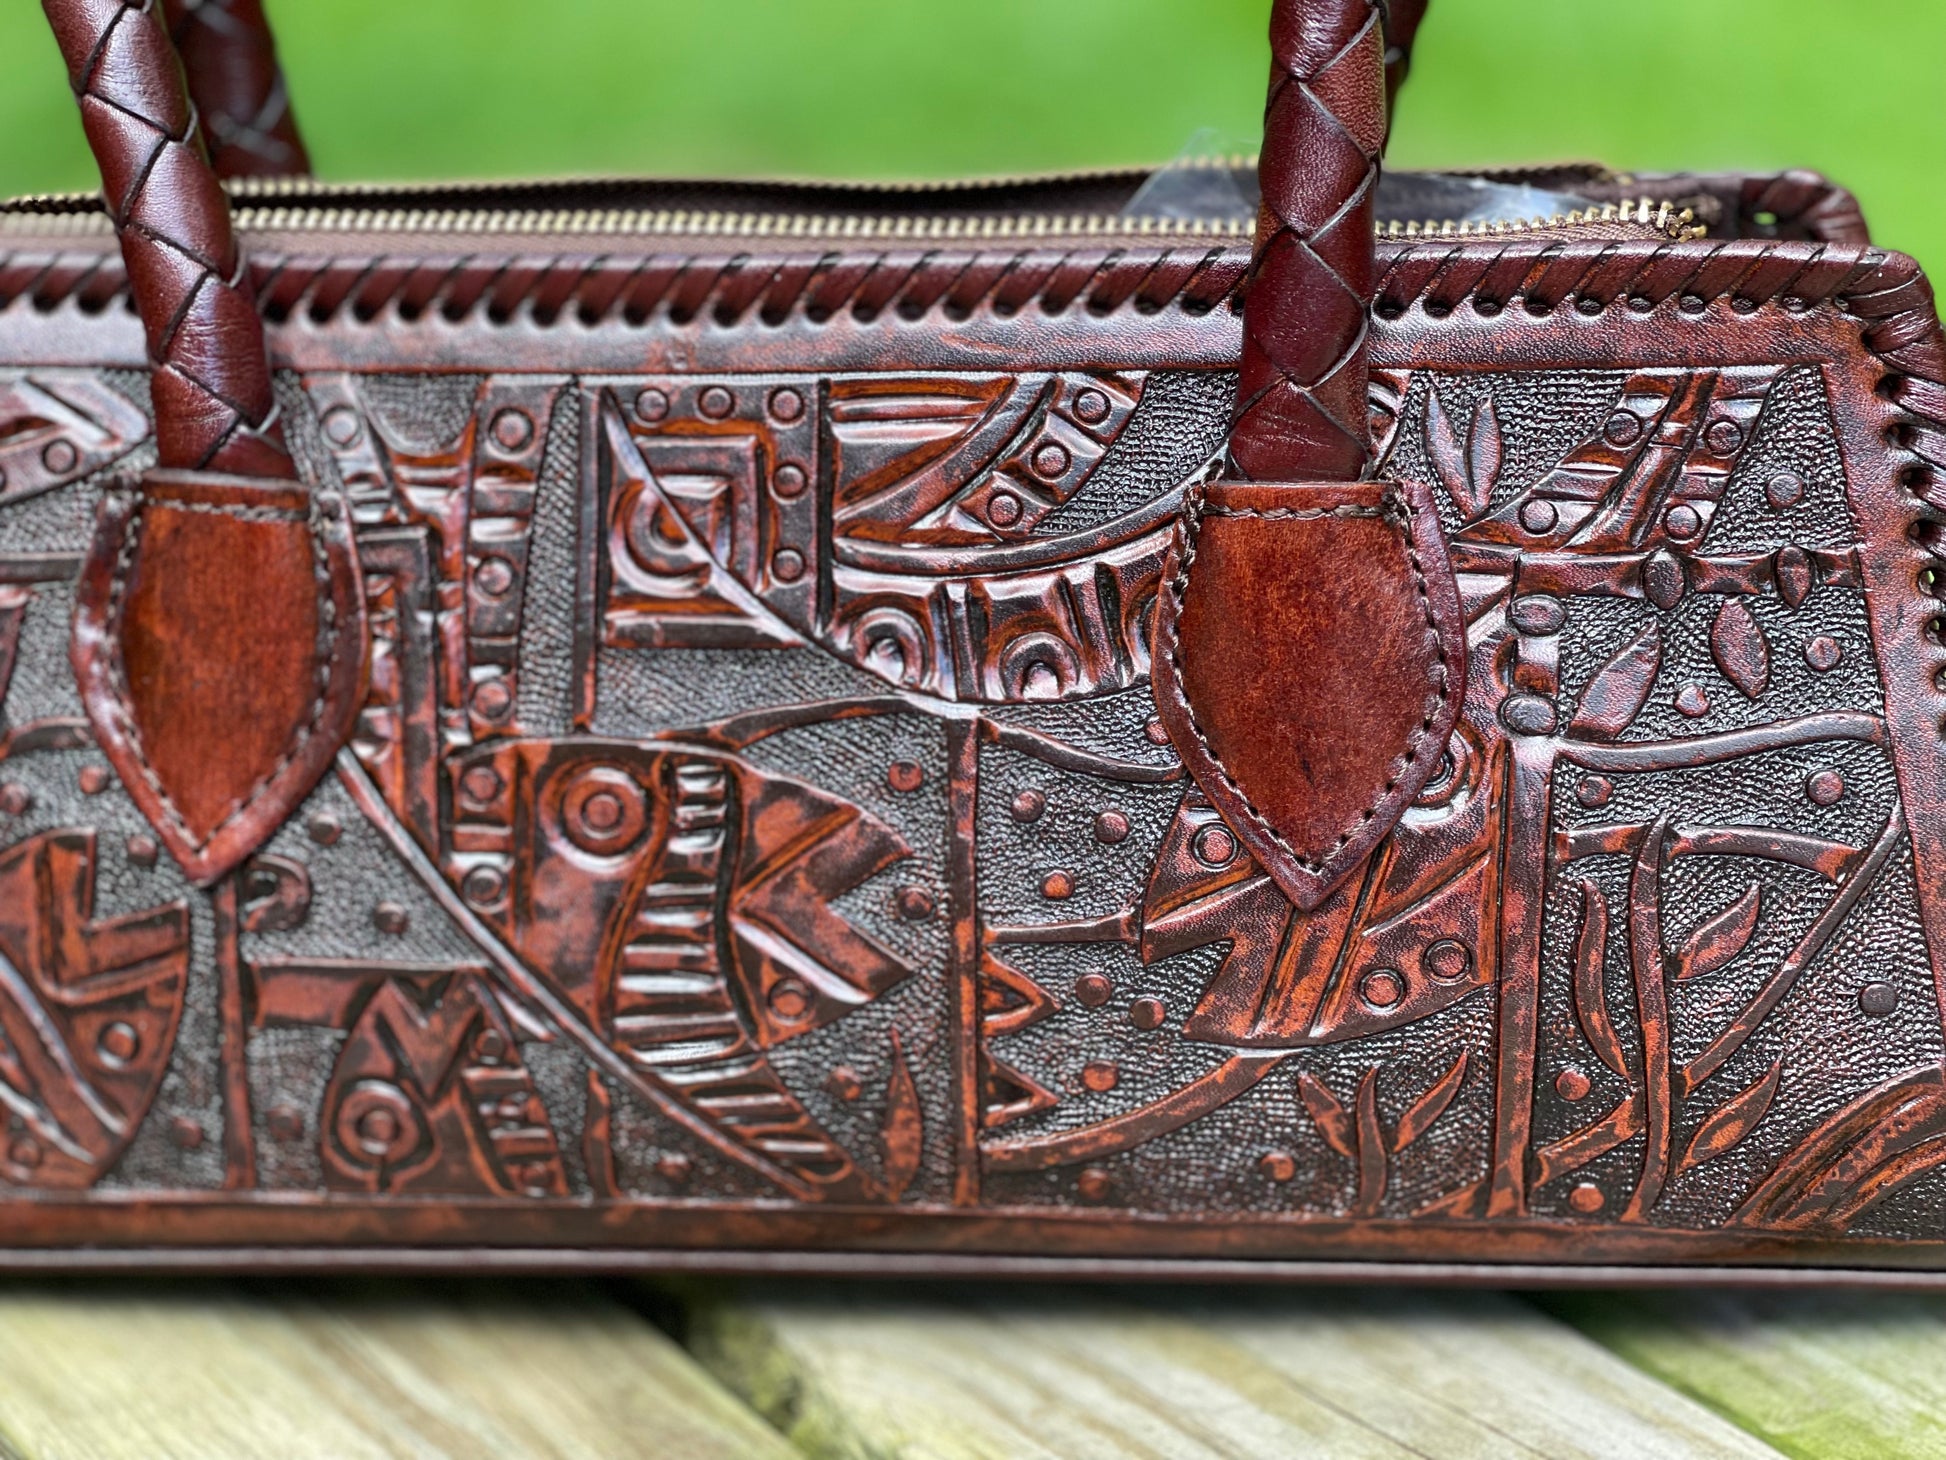 Hand Tooled leather Small Satchel "LARGA" by ALLE - ALLE Handbags